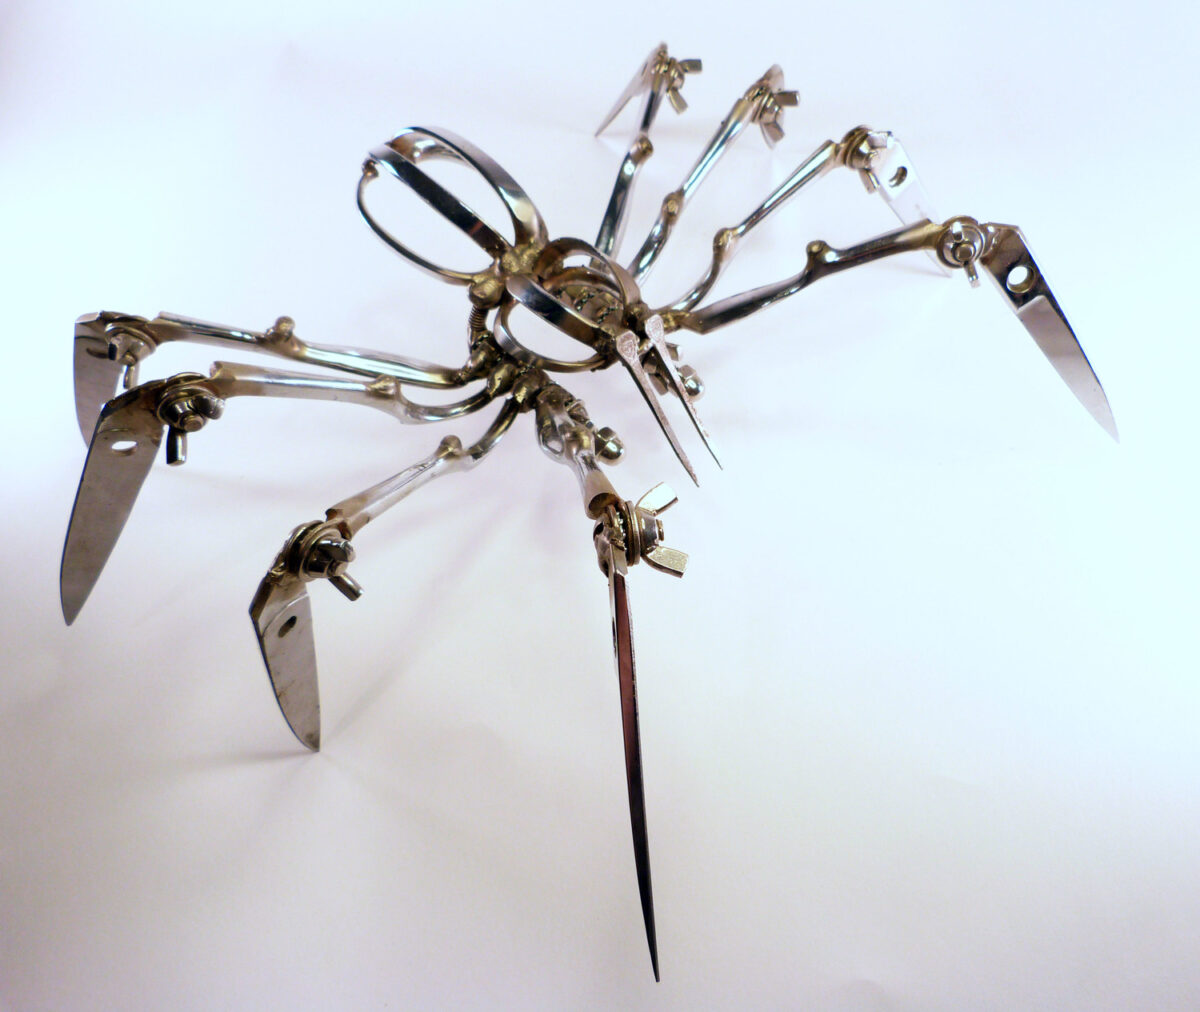 Scissors Confiscated By The Tsa Transformed Into Amazing Spider Sculptures By Christopher Locke (4)